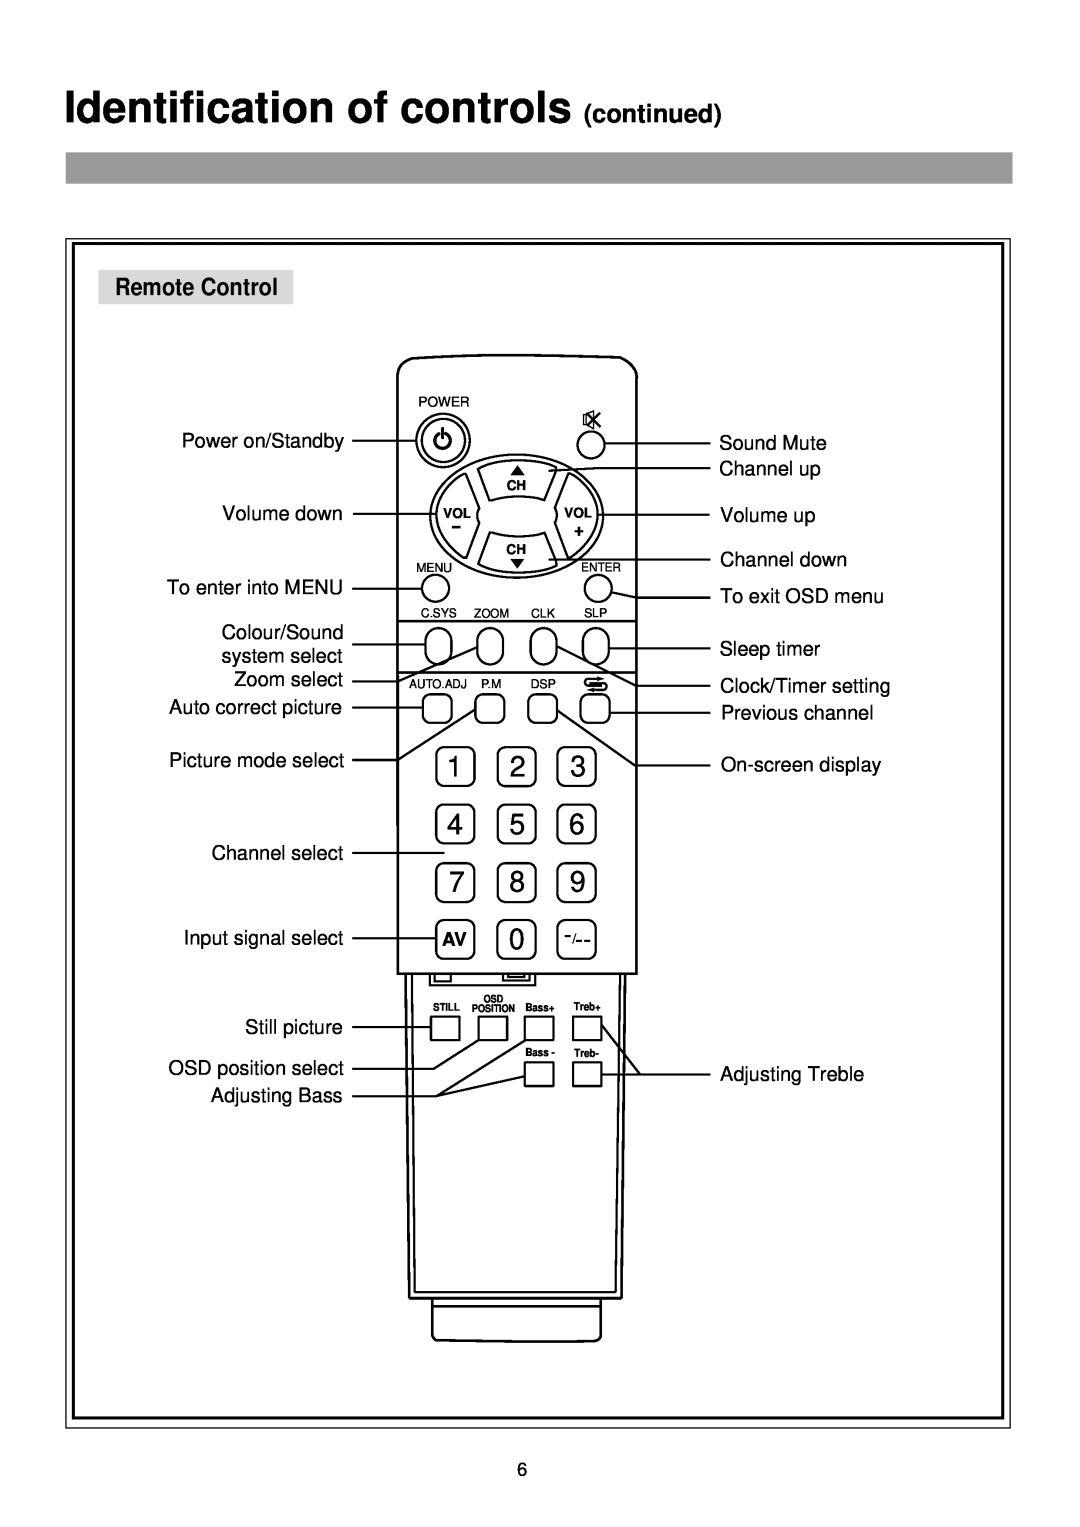 Palsonic TFTV-760 owner manual Identification of controls continued, 4 5 7 8, Remote Control 